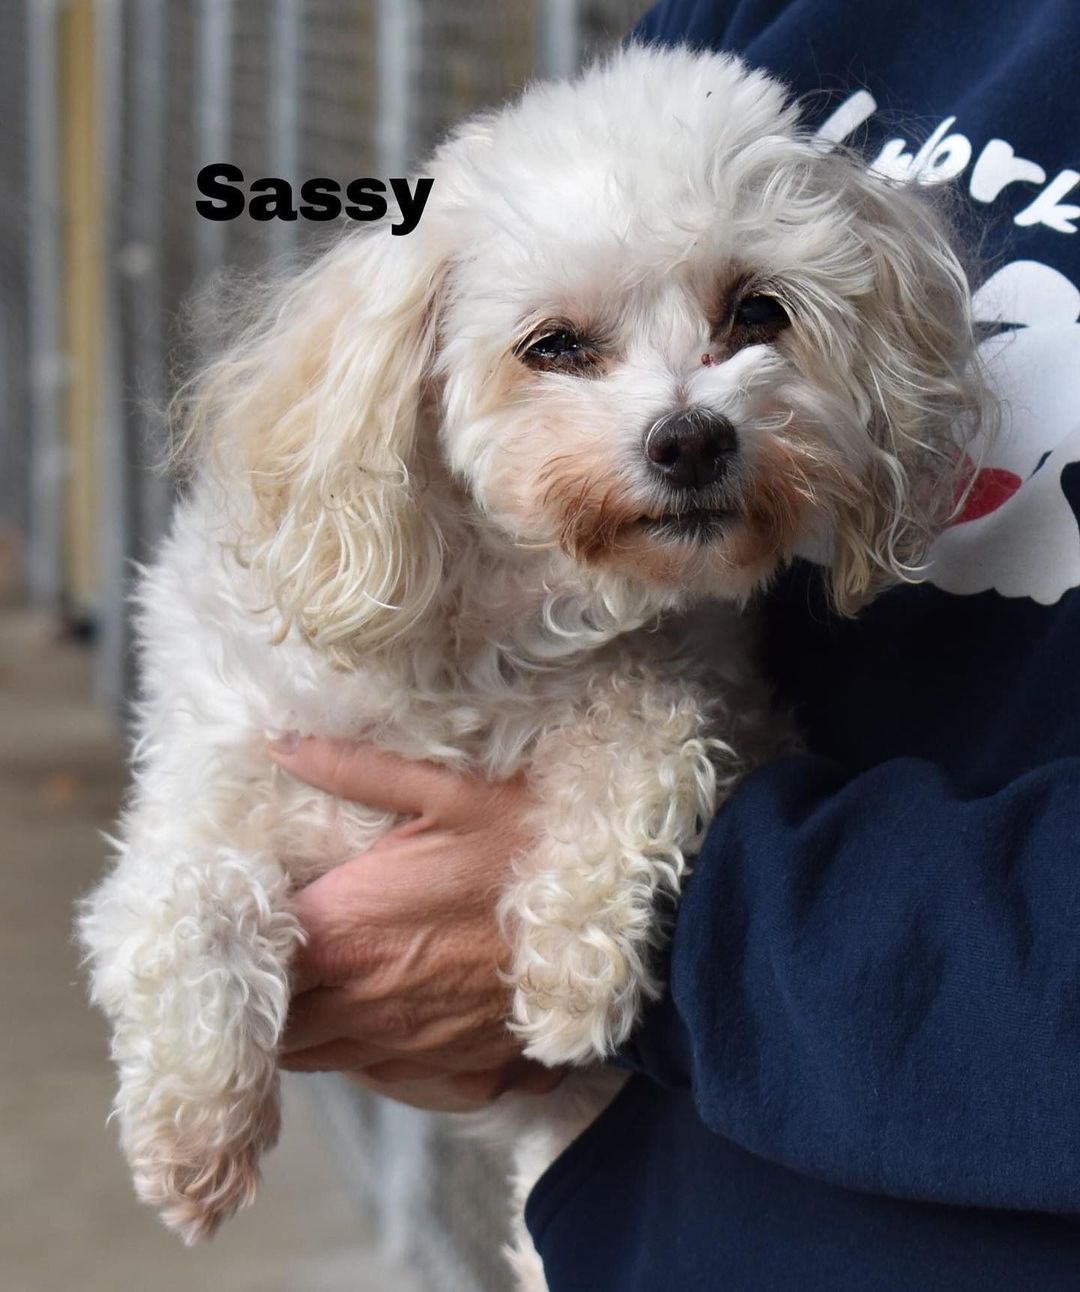 Hi my name is Sassy. I am a 11 year old Poodle mix. I am a social butterfly, that is looking for someone to snuggle on the couch with. If interested in adopting go to our website www.deltaanimal.org and fill out an application.